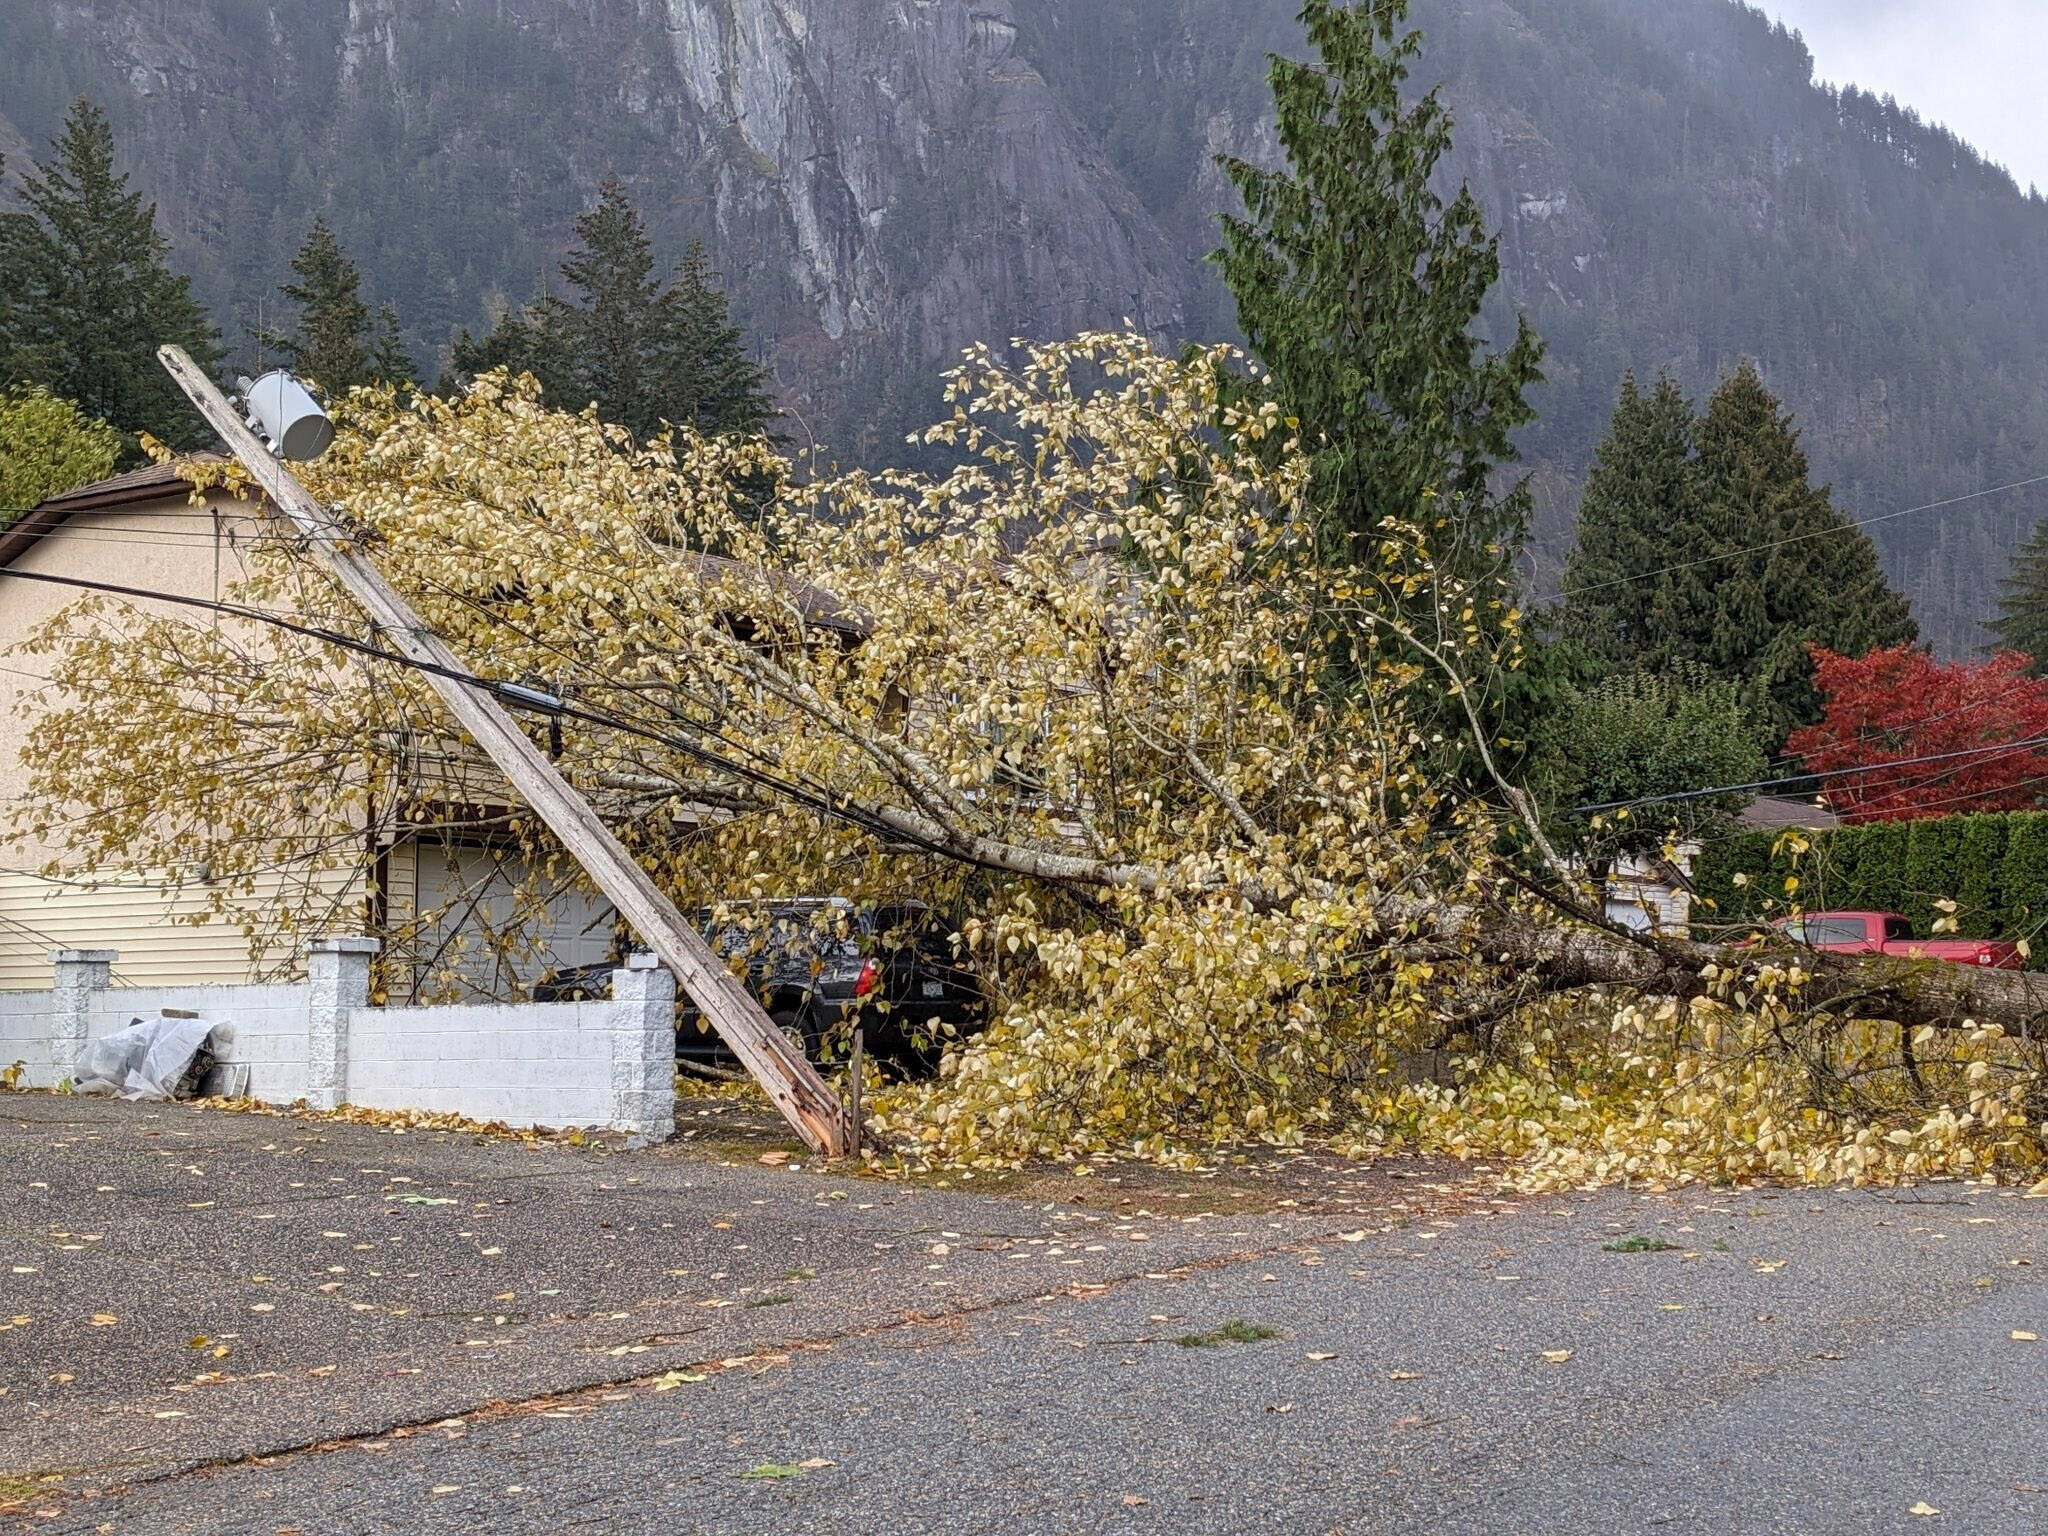 A tree came down across Silverview Road in Hope, taking power lines with it during the windstorm that tore through the Eastern Fraser Valley and other areas of the province on Friday, Nov. 4, 2022. (Pattie Desjardins/ Hope Standard)